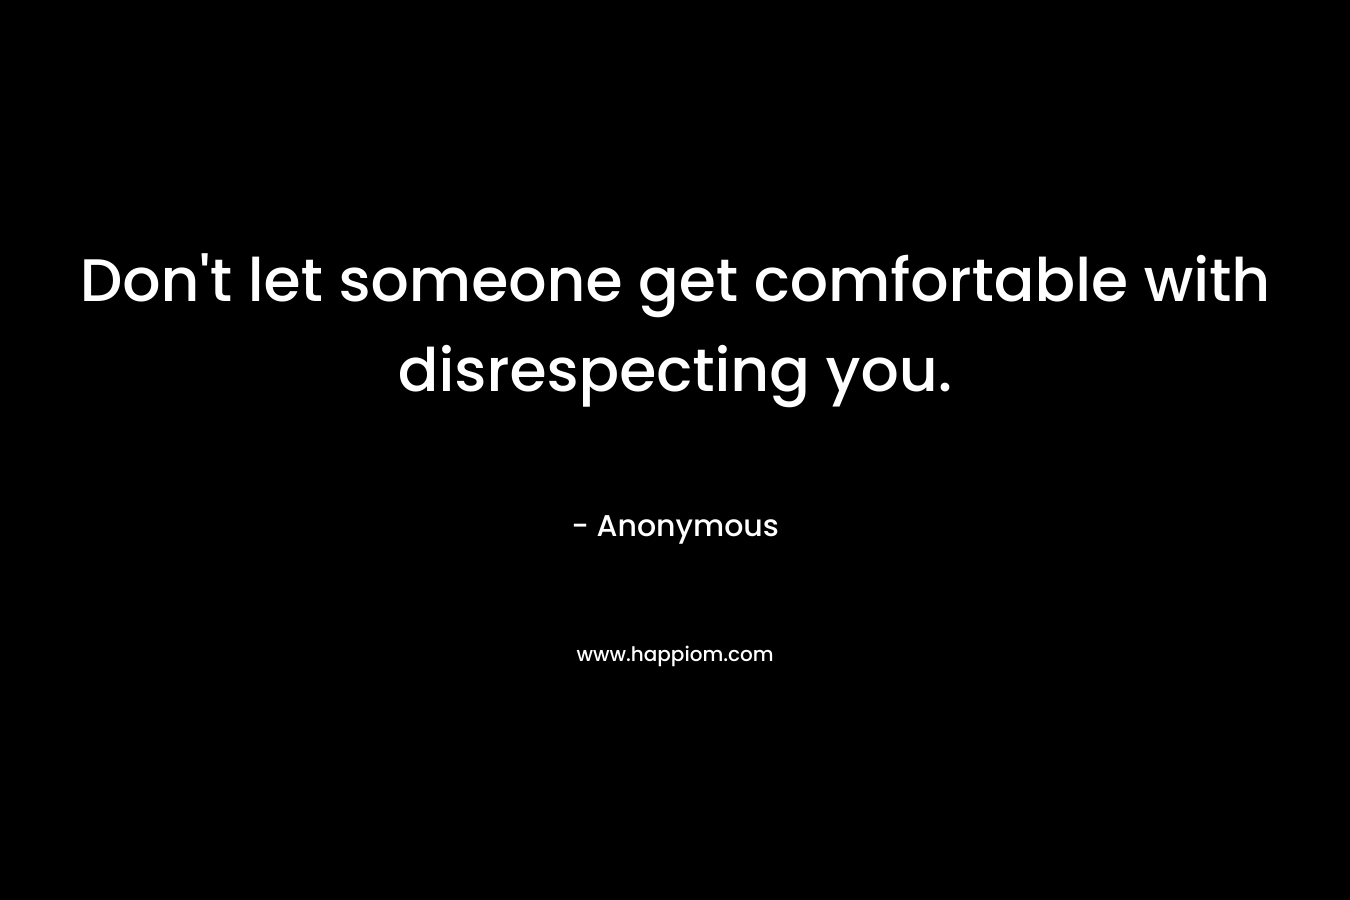 Don't let someone get comfortable with disrespecting you.